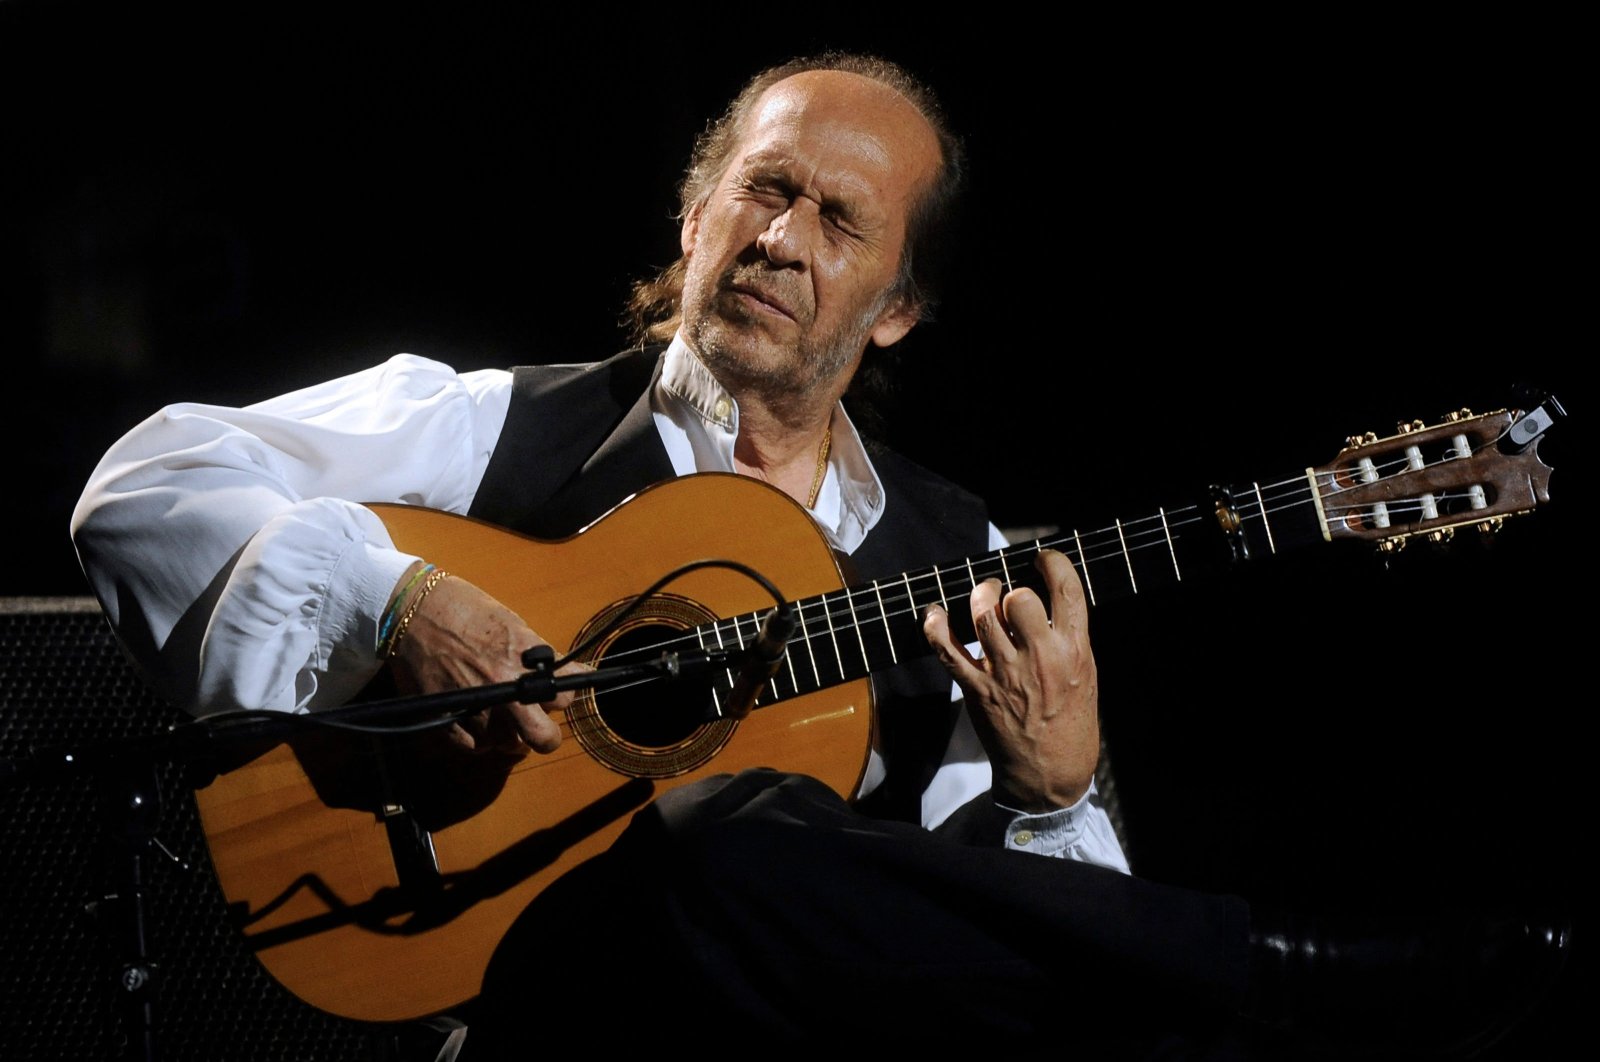 Spanish guitarist Paco de Lucia performs on stage during the 37th Jazz Festival of Vitoria in the Basque city of Vitoria, Spain, July 20, 2013. (AFP Photo)